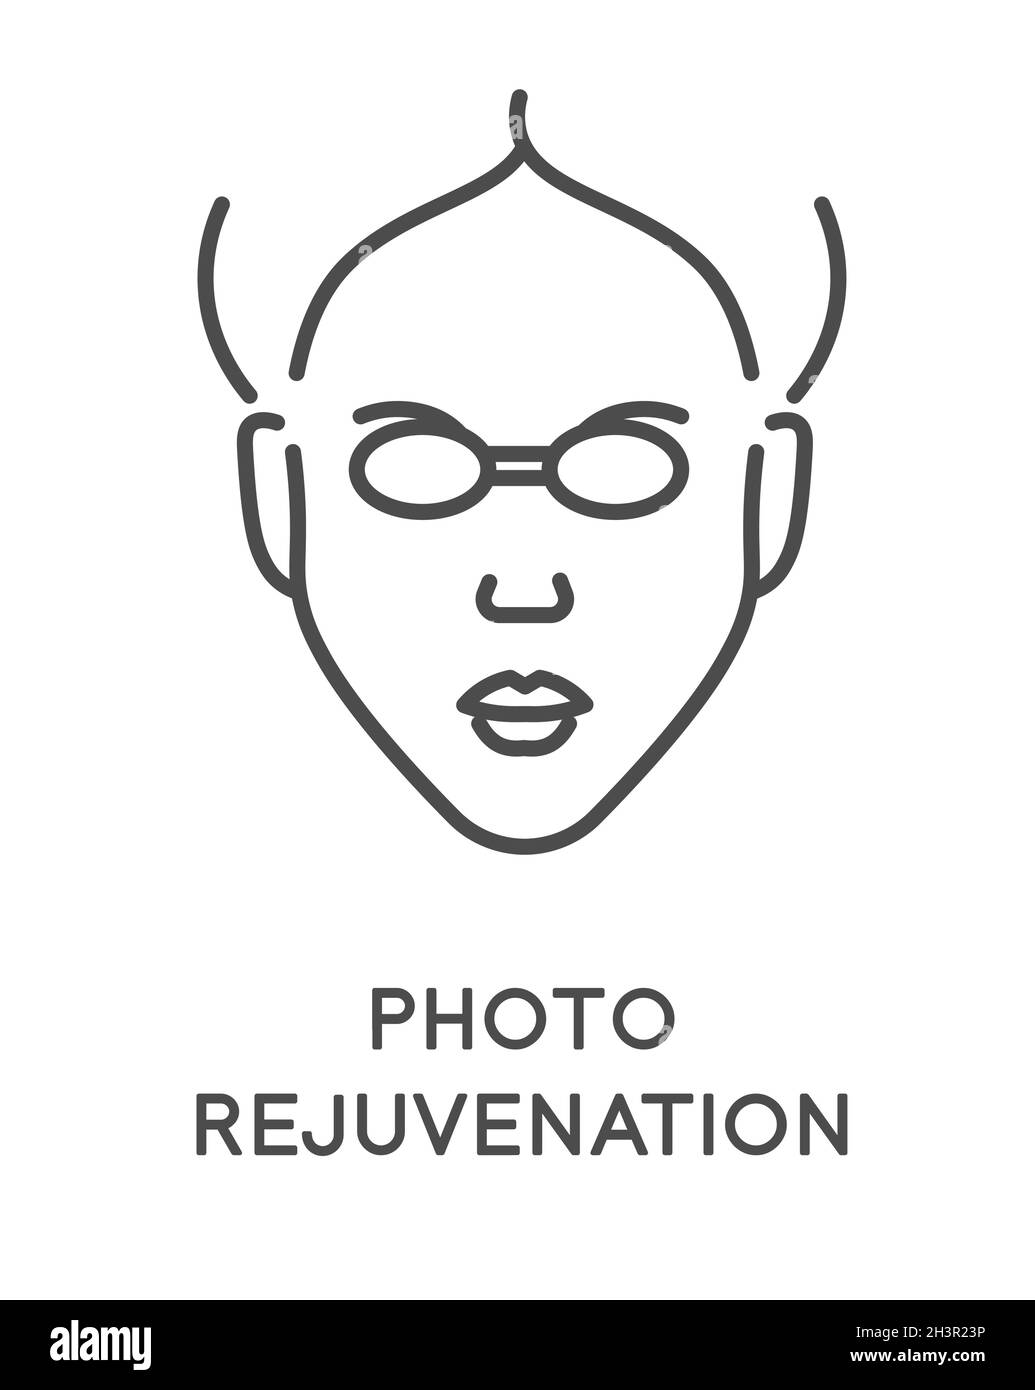 Cosmetology and skincare, photo rejuvenation isolated line icon Stock Vector